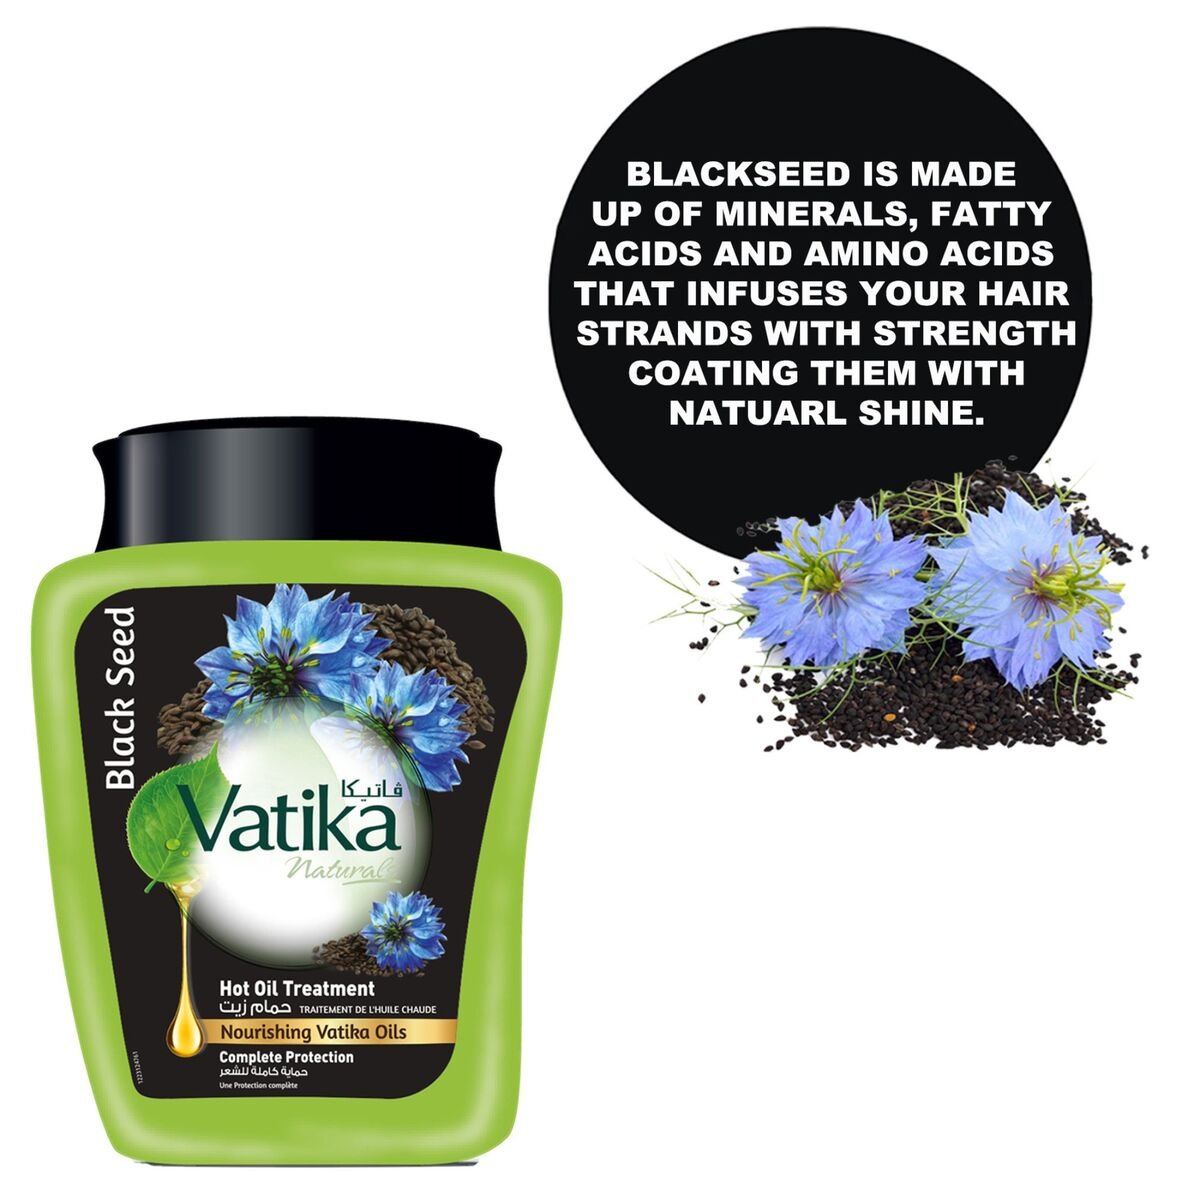 Vatika Naturals Hammam Zaith Hot Oil Treatment Enriched With Blackseed Complete Protection 1 kg